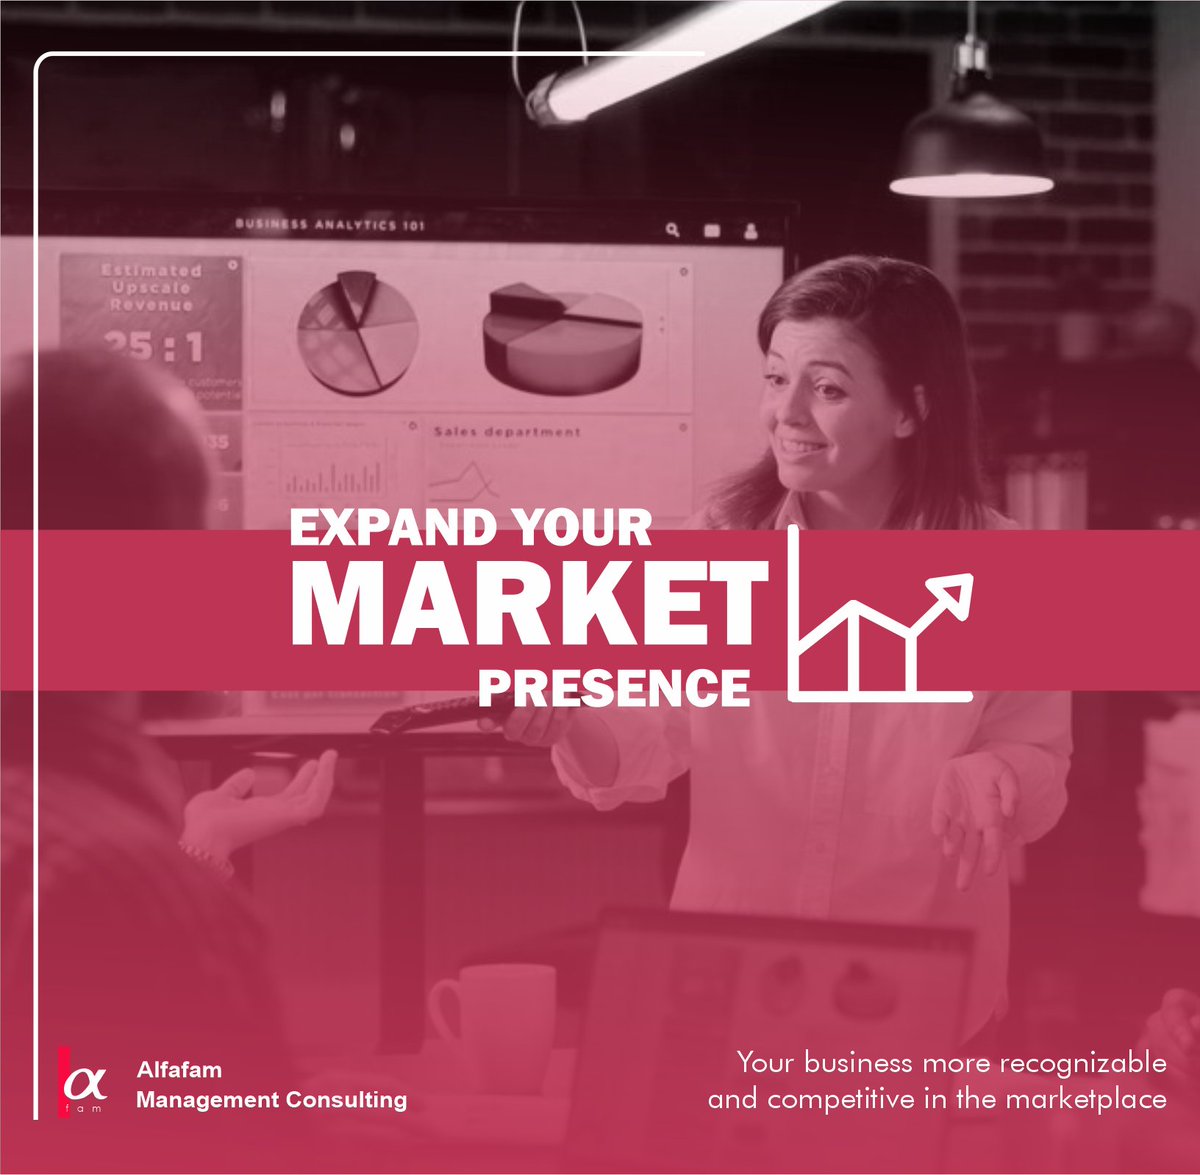 Expanding Market Presence and Visibility is a benefit of a broad client base, making your business more recognizable and competitive in the marketplace. It enables you to negotiate advantageous partnerships with other businesses, further boosting your visibility. #MarketPresence